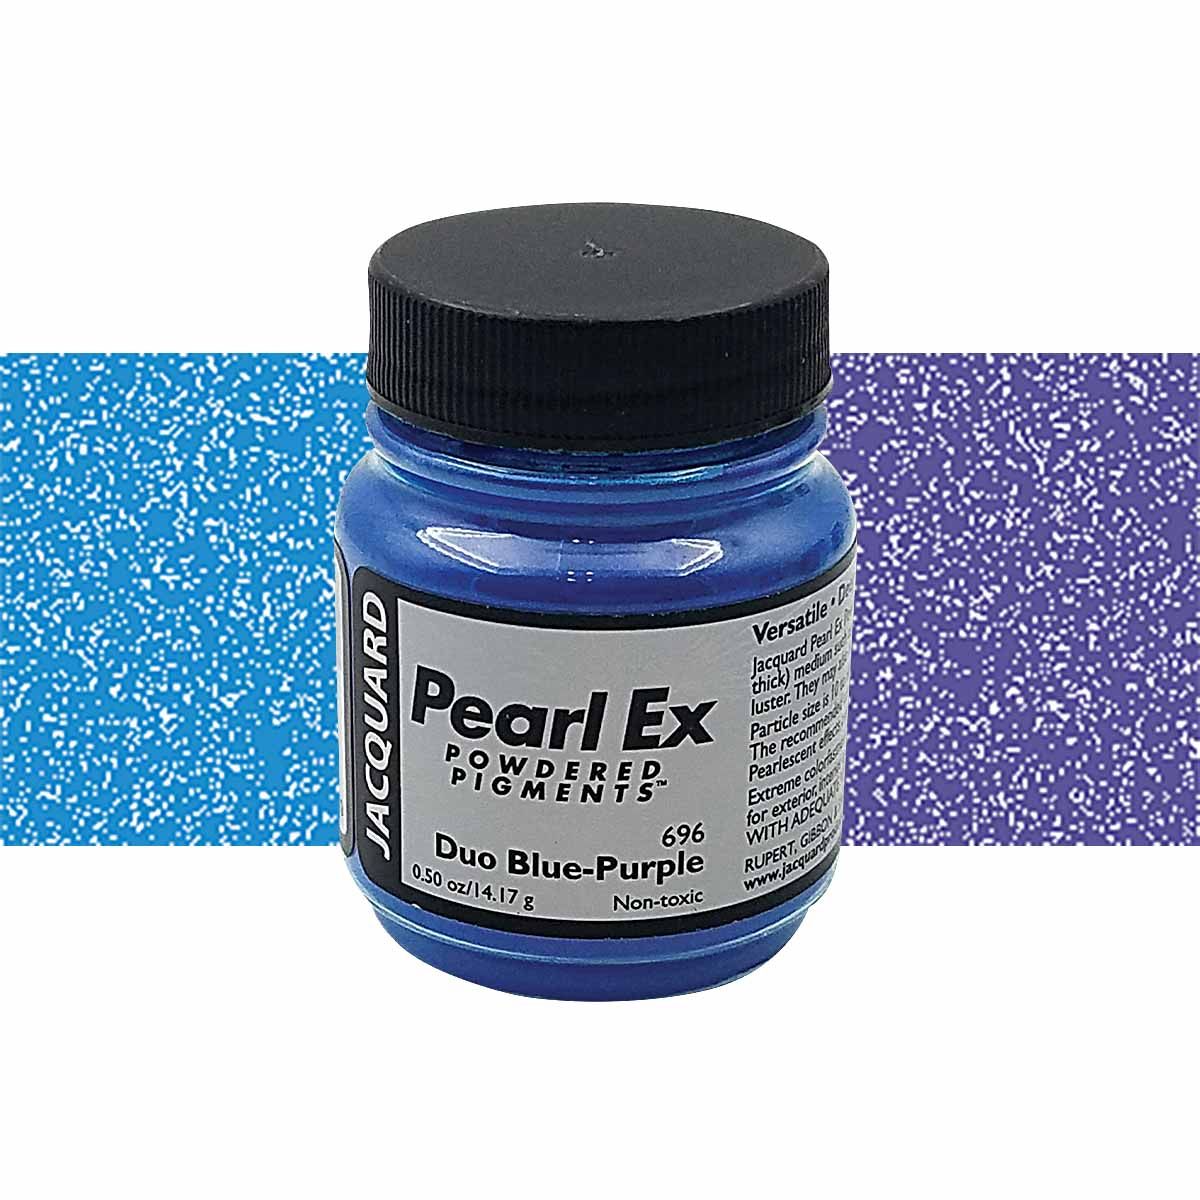 Pearl Ex Powdered Pigments duo red-blue, 0.50 oz. (pack of 3